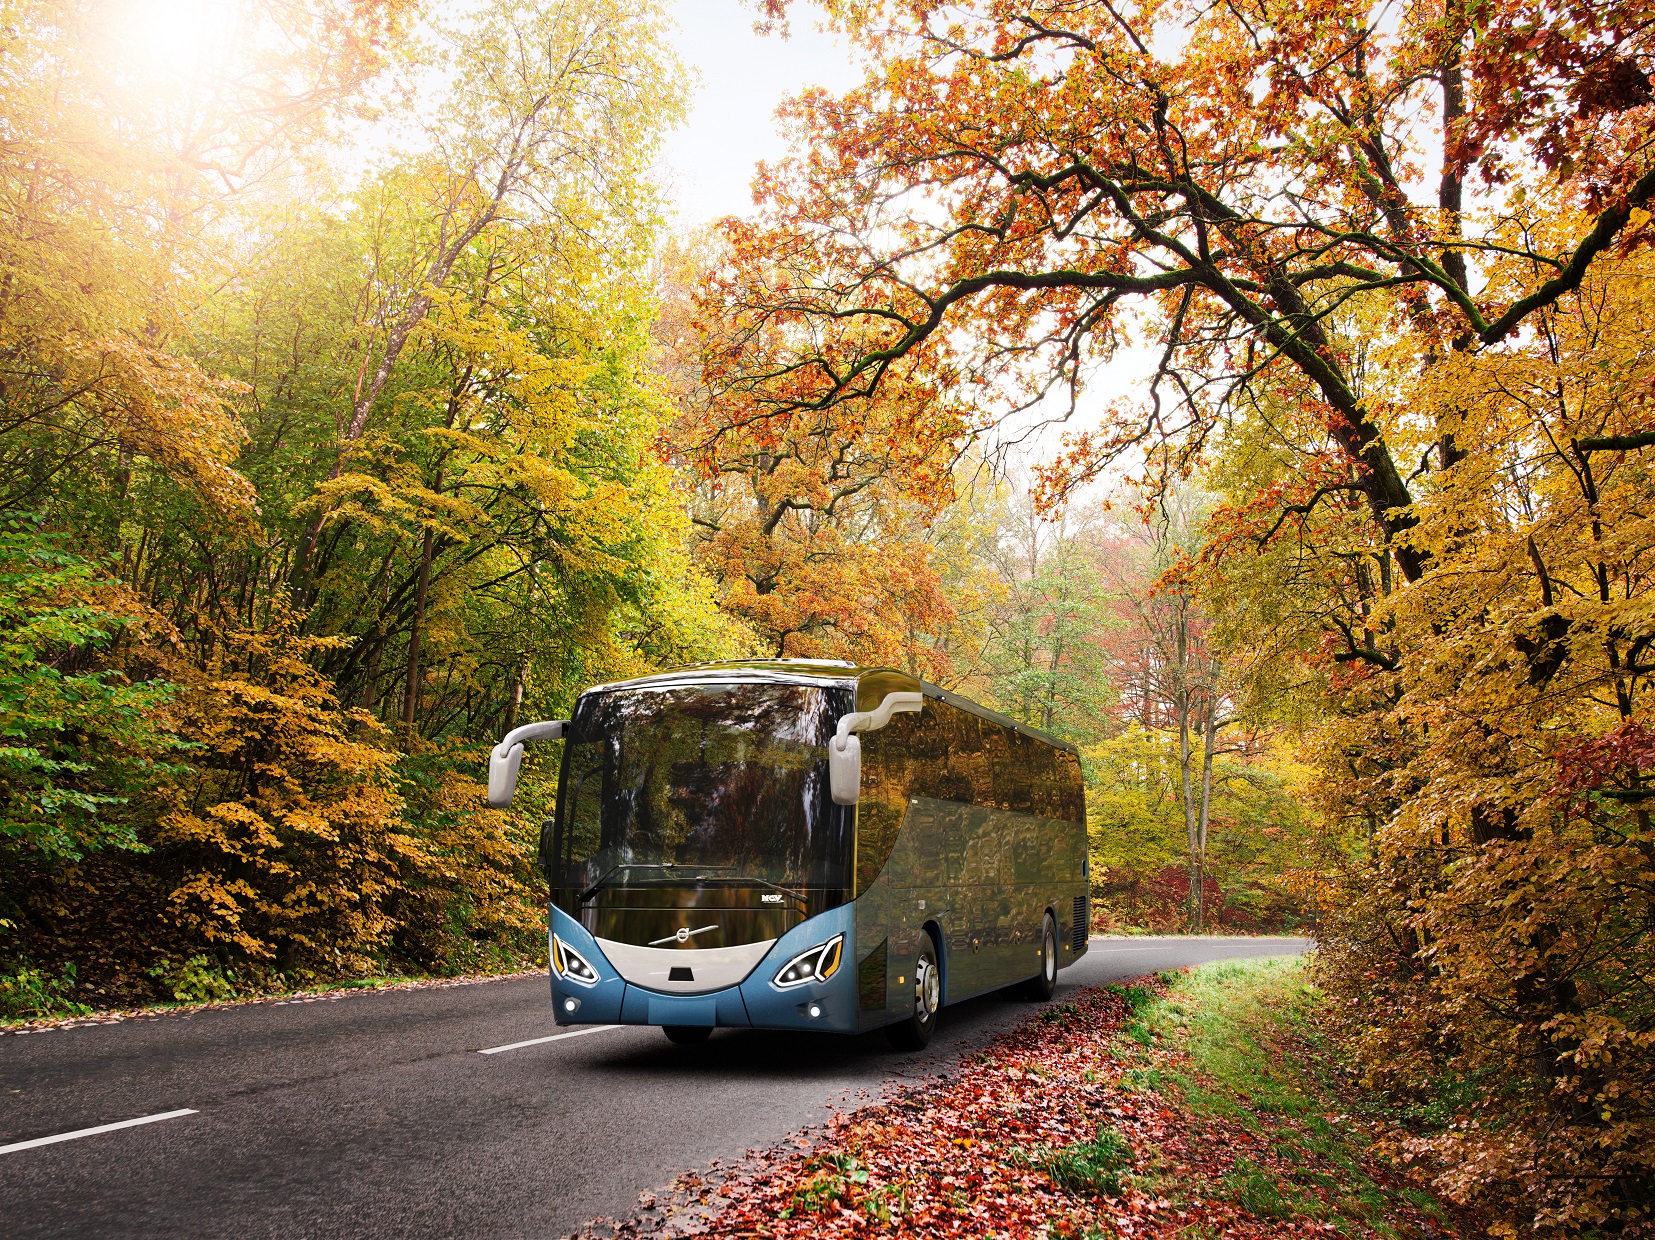 Coach Hire Cost Comparison: Small Coaches vs. Large Coaches for Group Travel